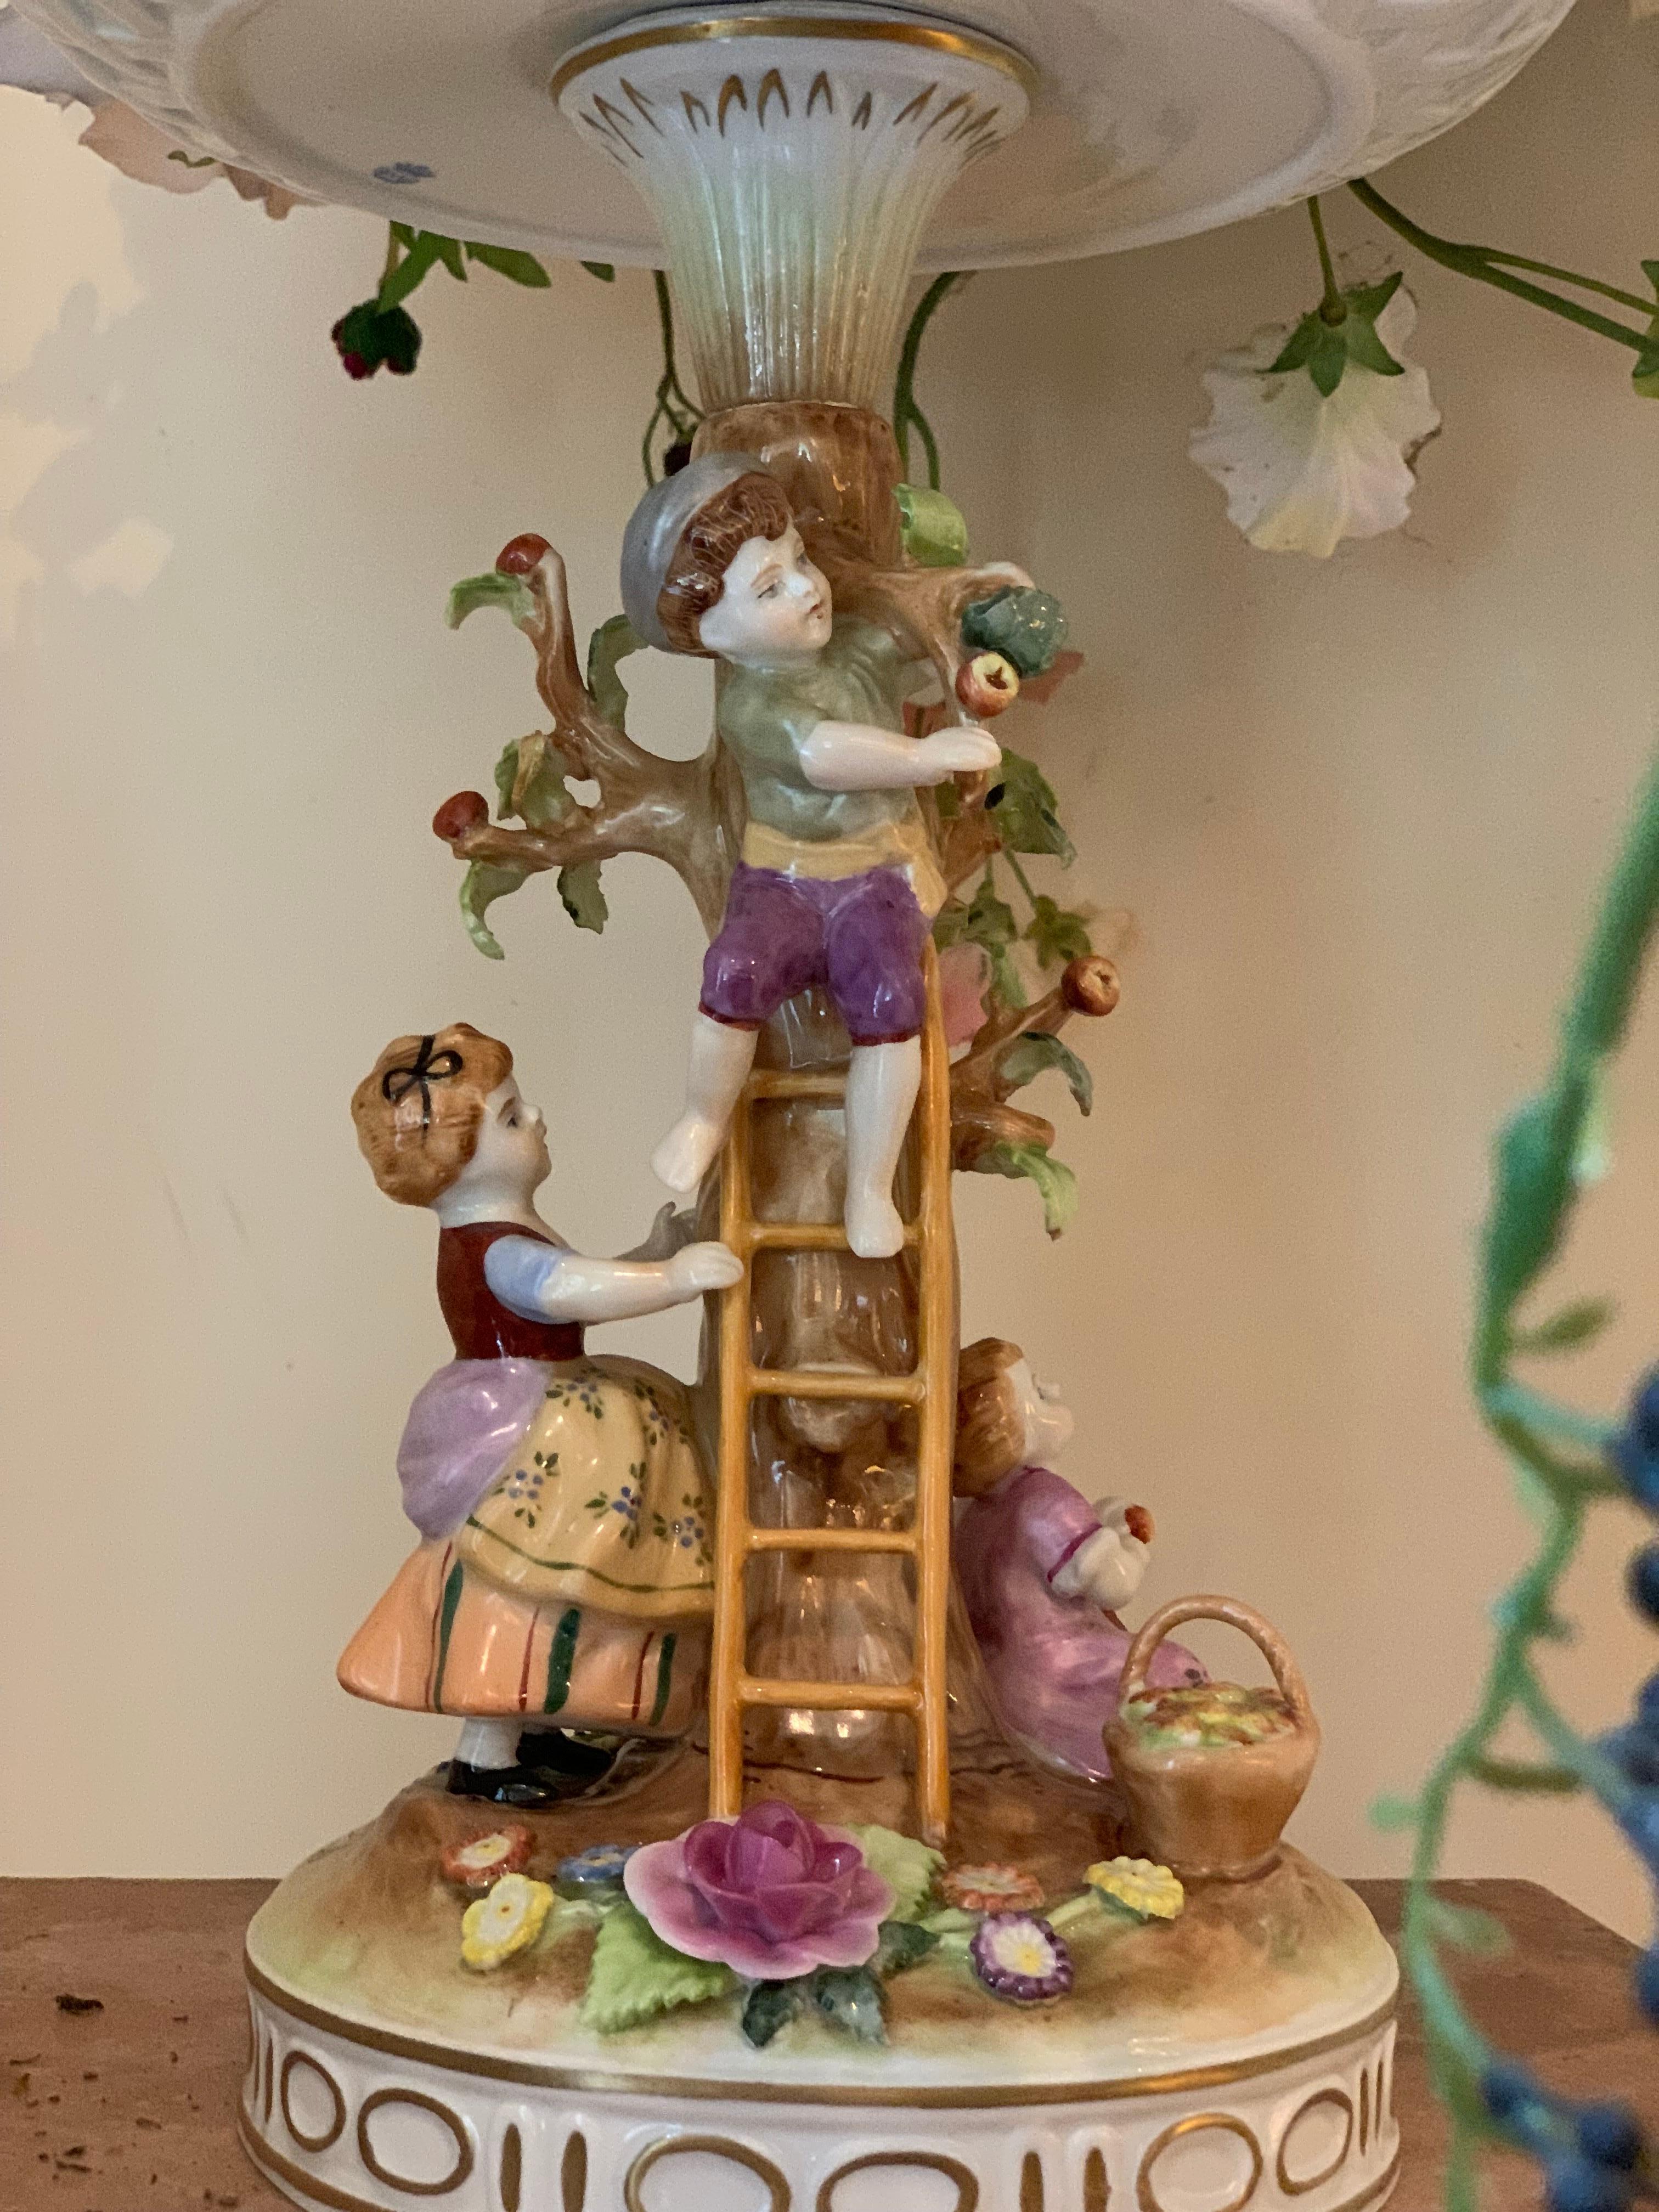 House of Schierholz Plaue is founded in 1890. This porcelain flower box is manufactured in Germany, before 1989. The object are figures, children at an apple tree. Above is a box that can hold flowers. Everything is painted and modulated by hand.